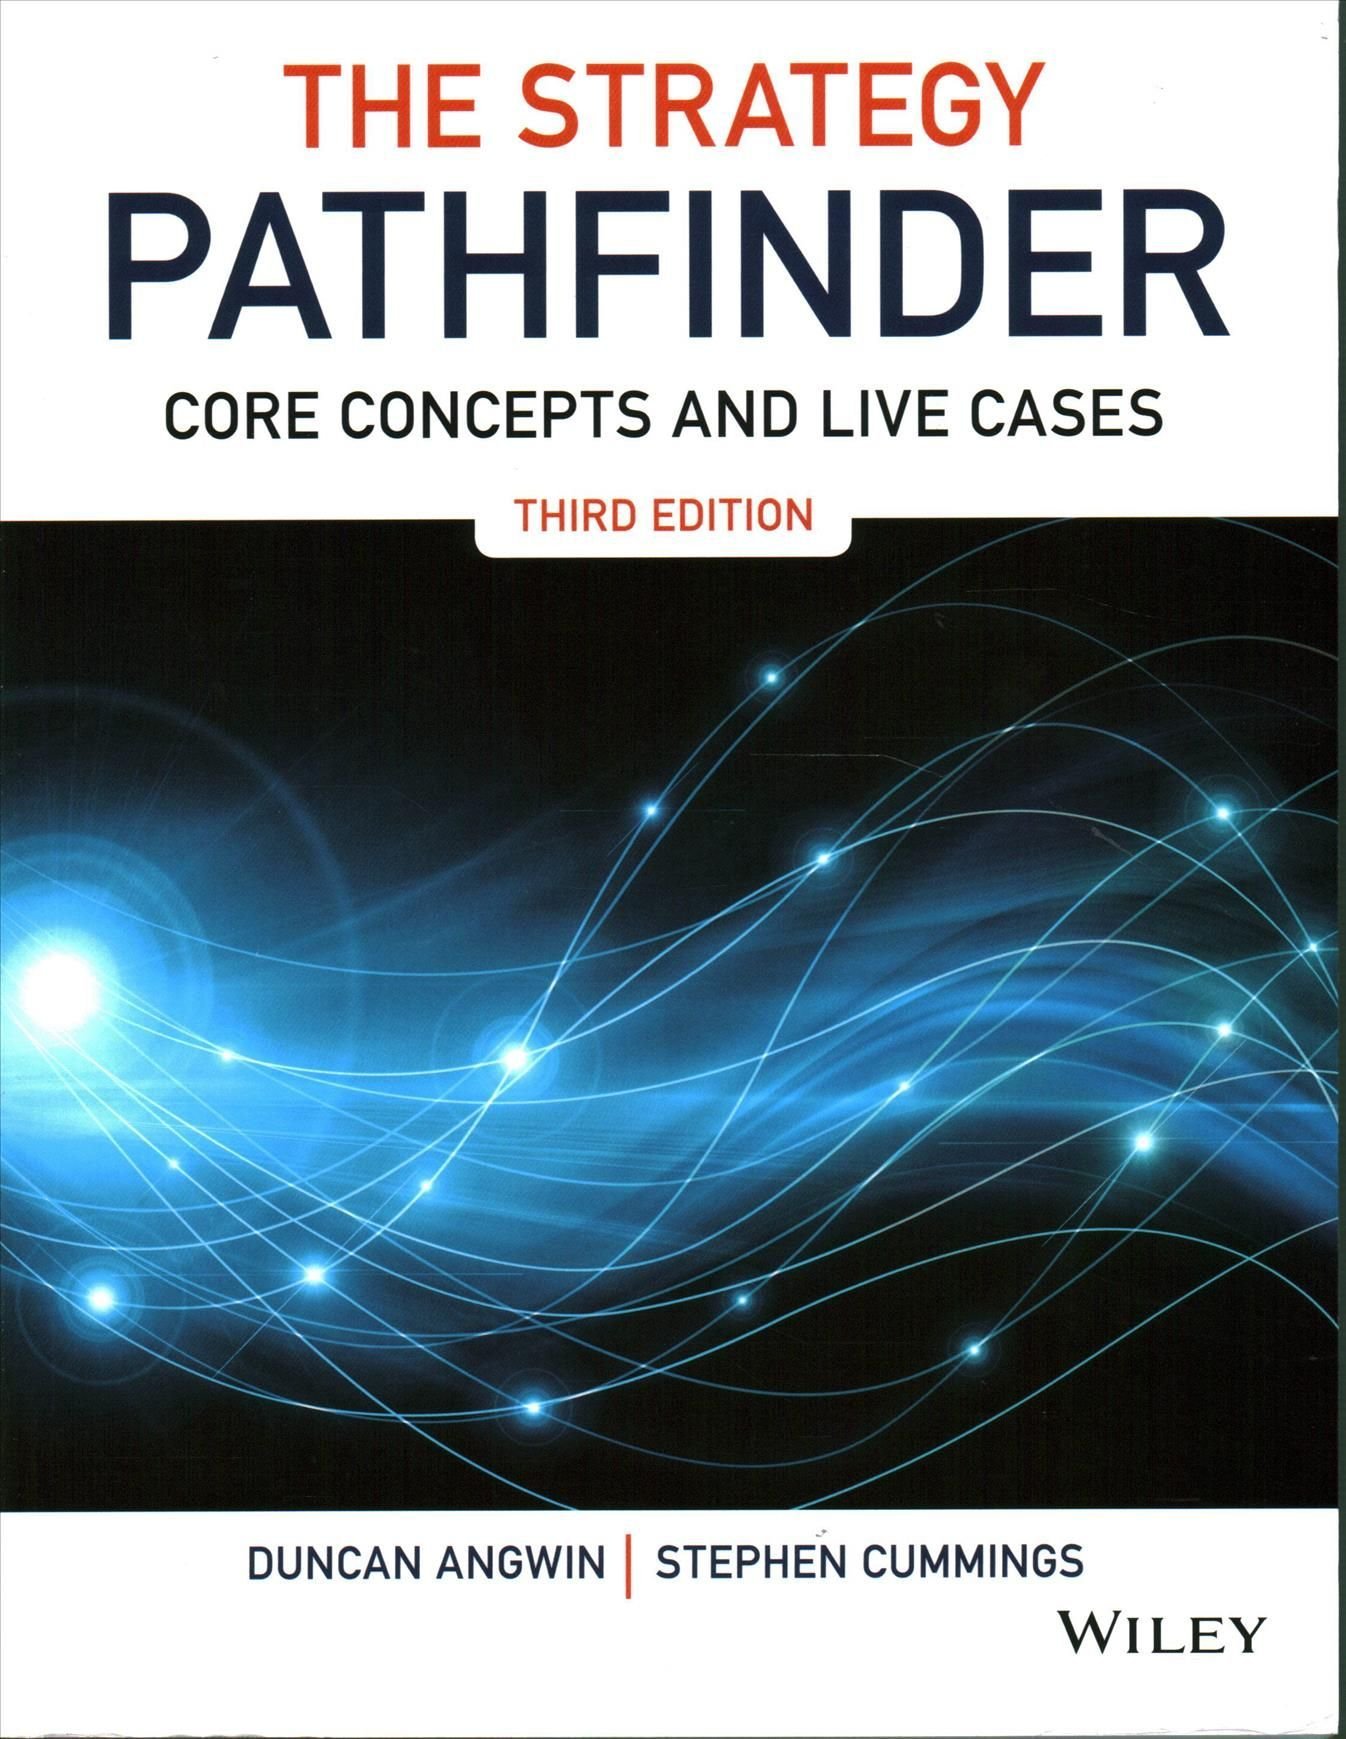 The Strategy Pathfinder - Core Concepts and Live Cases, Third Edition